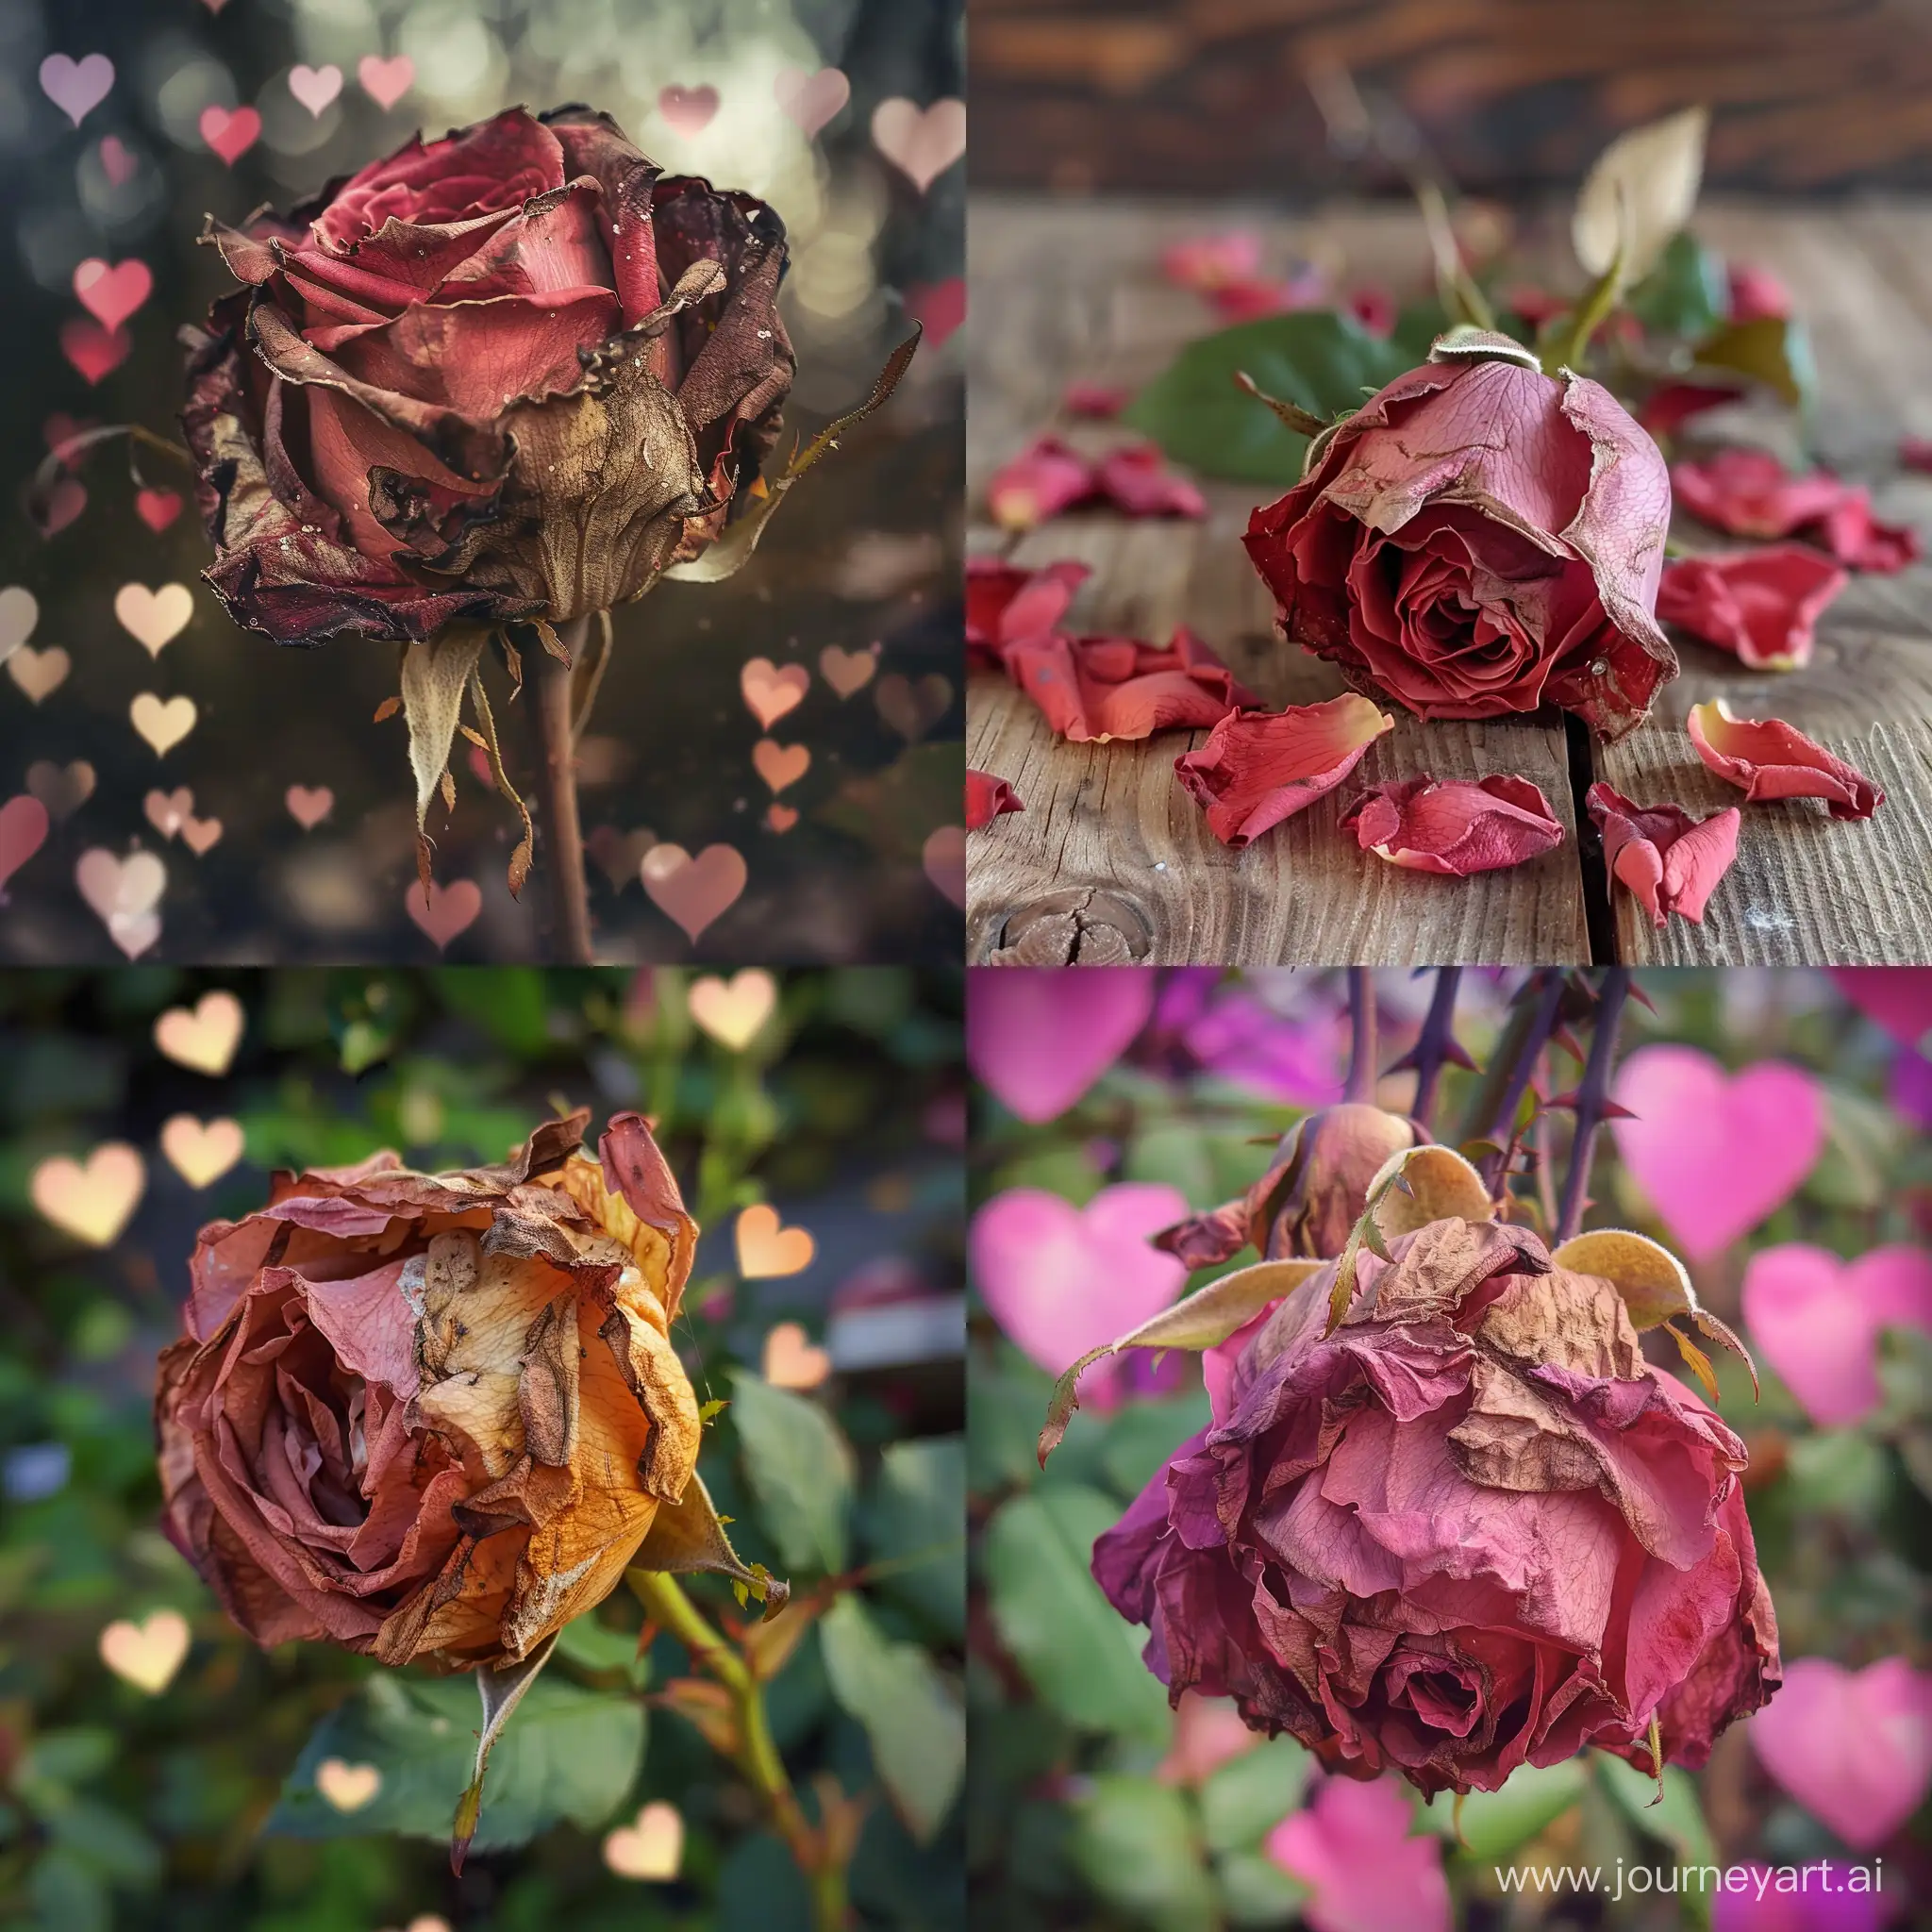 A withered rose surrounded by love